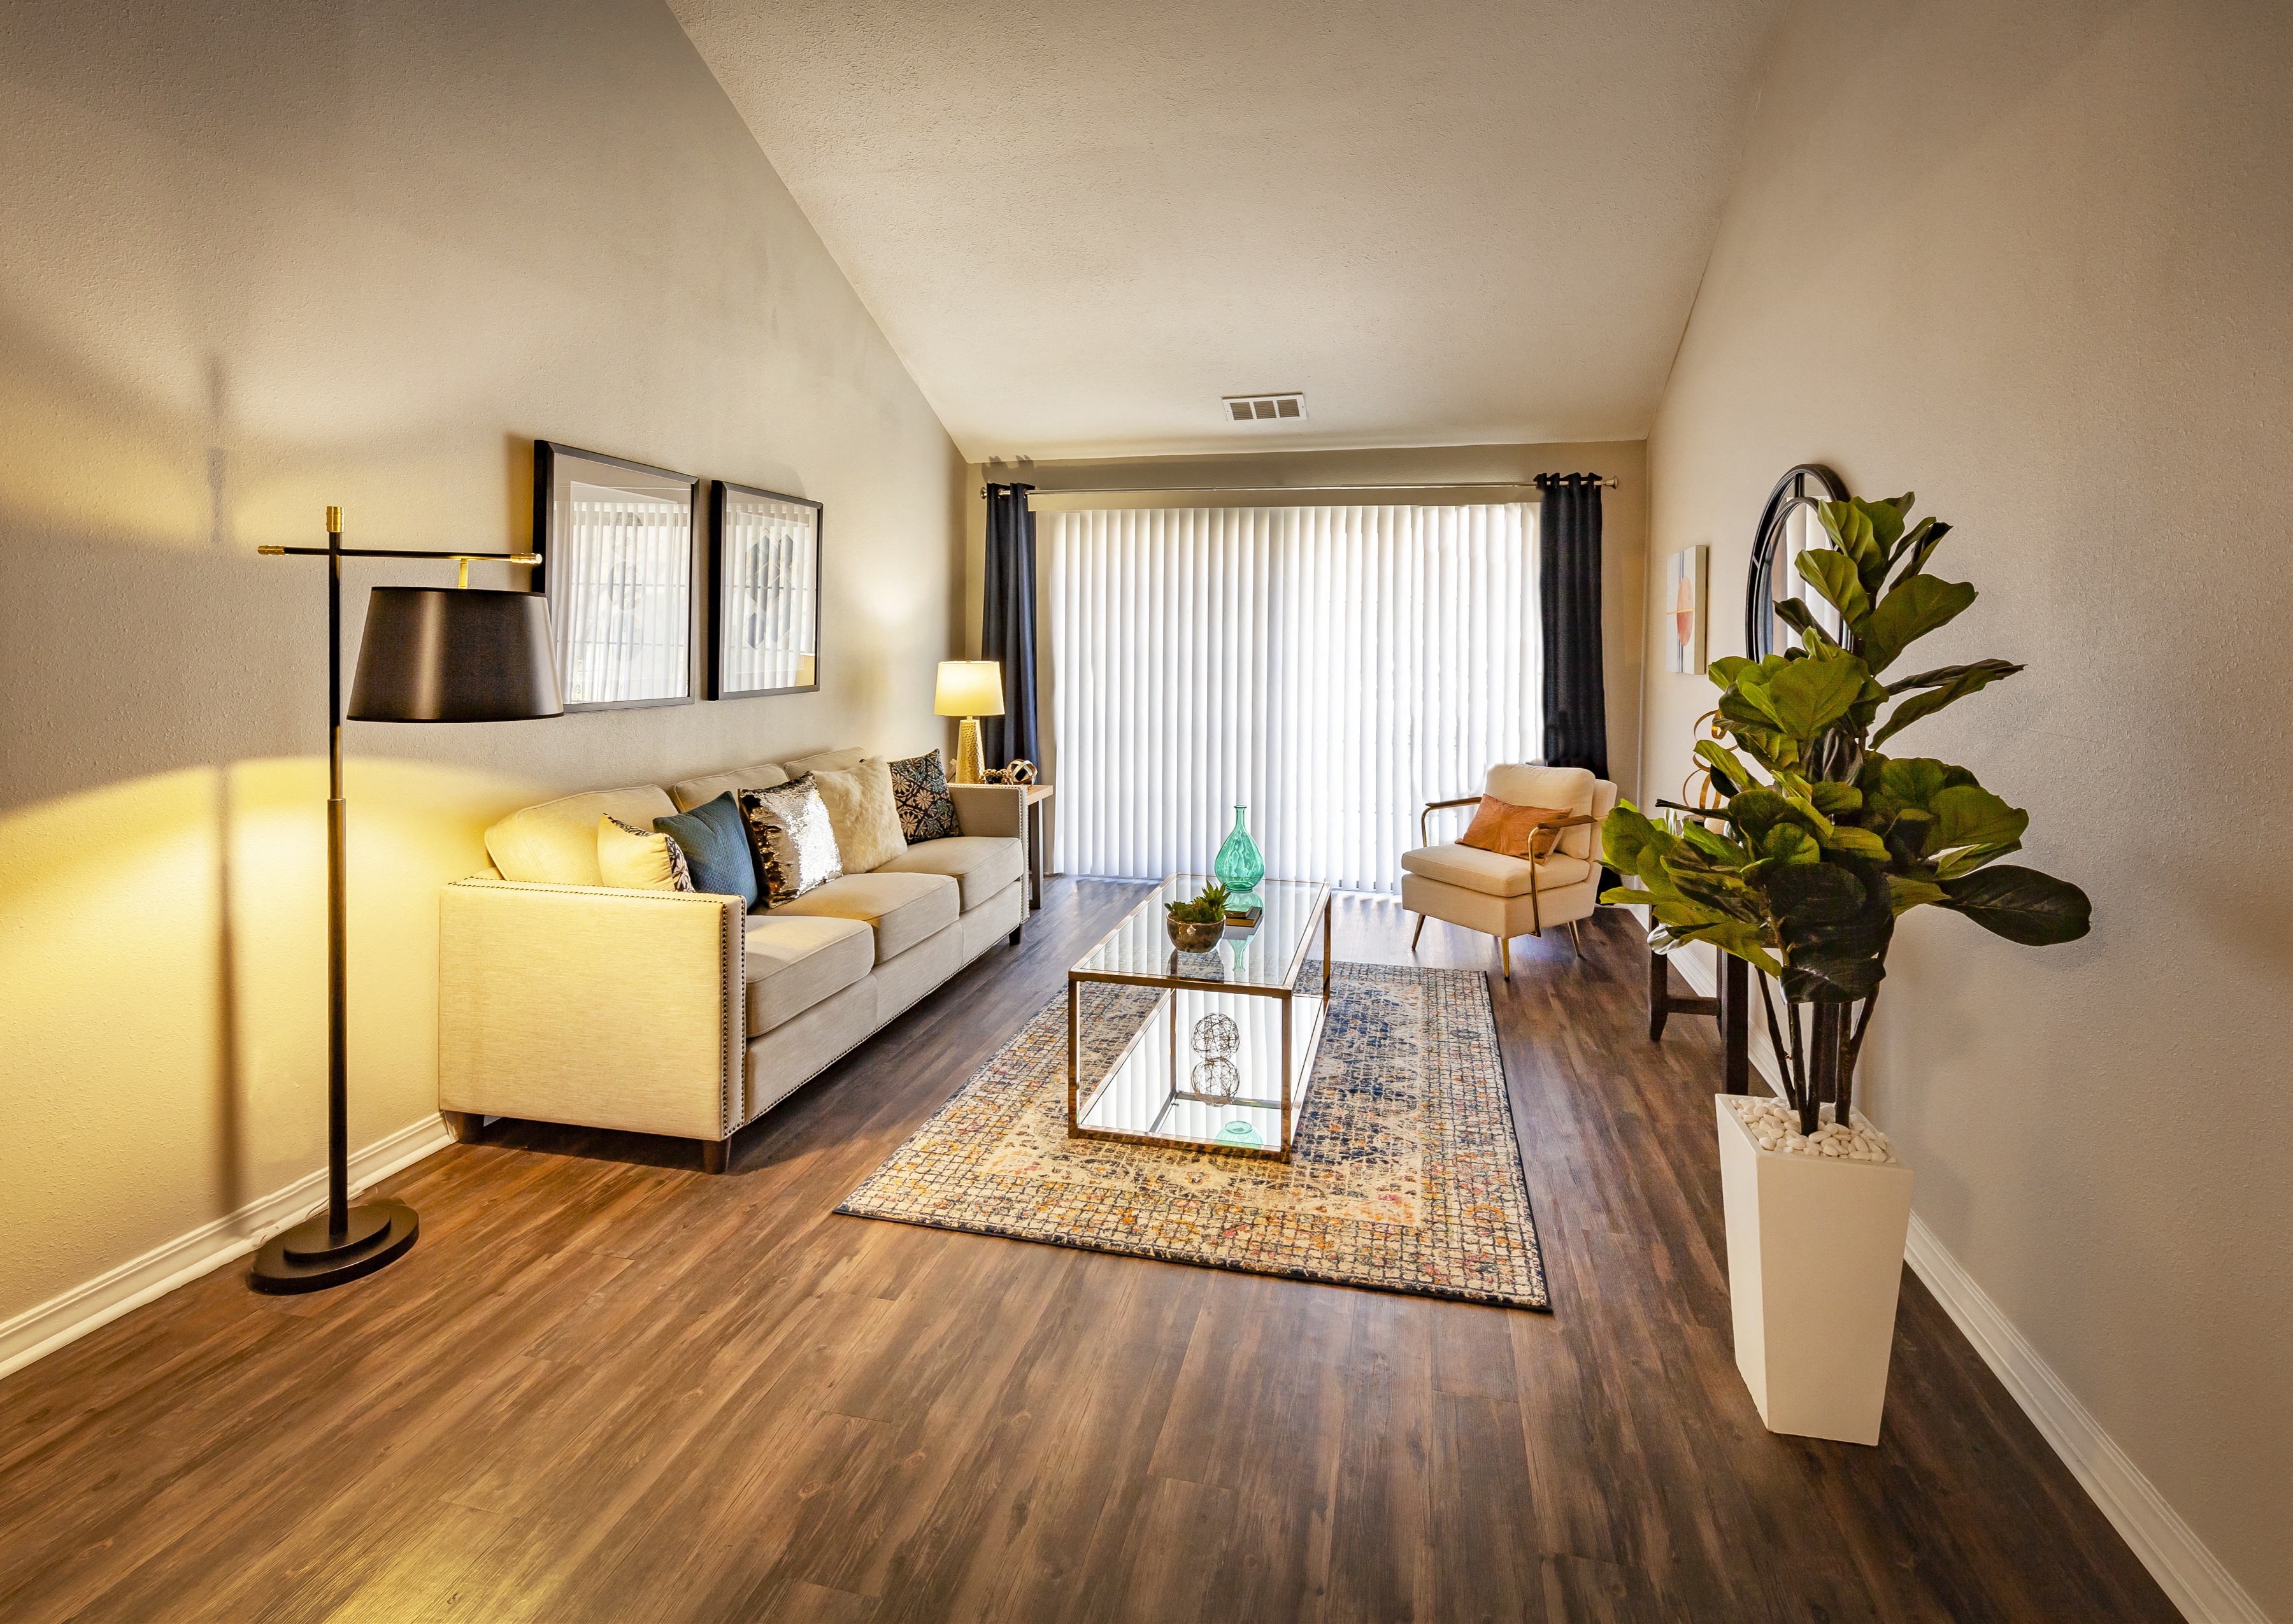 Wood Floor Living Room at Castle Point Apartments, South Bend